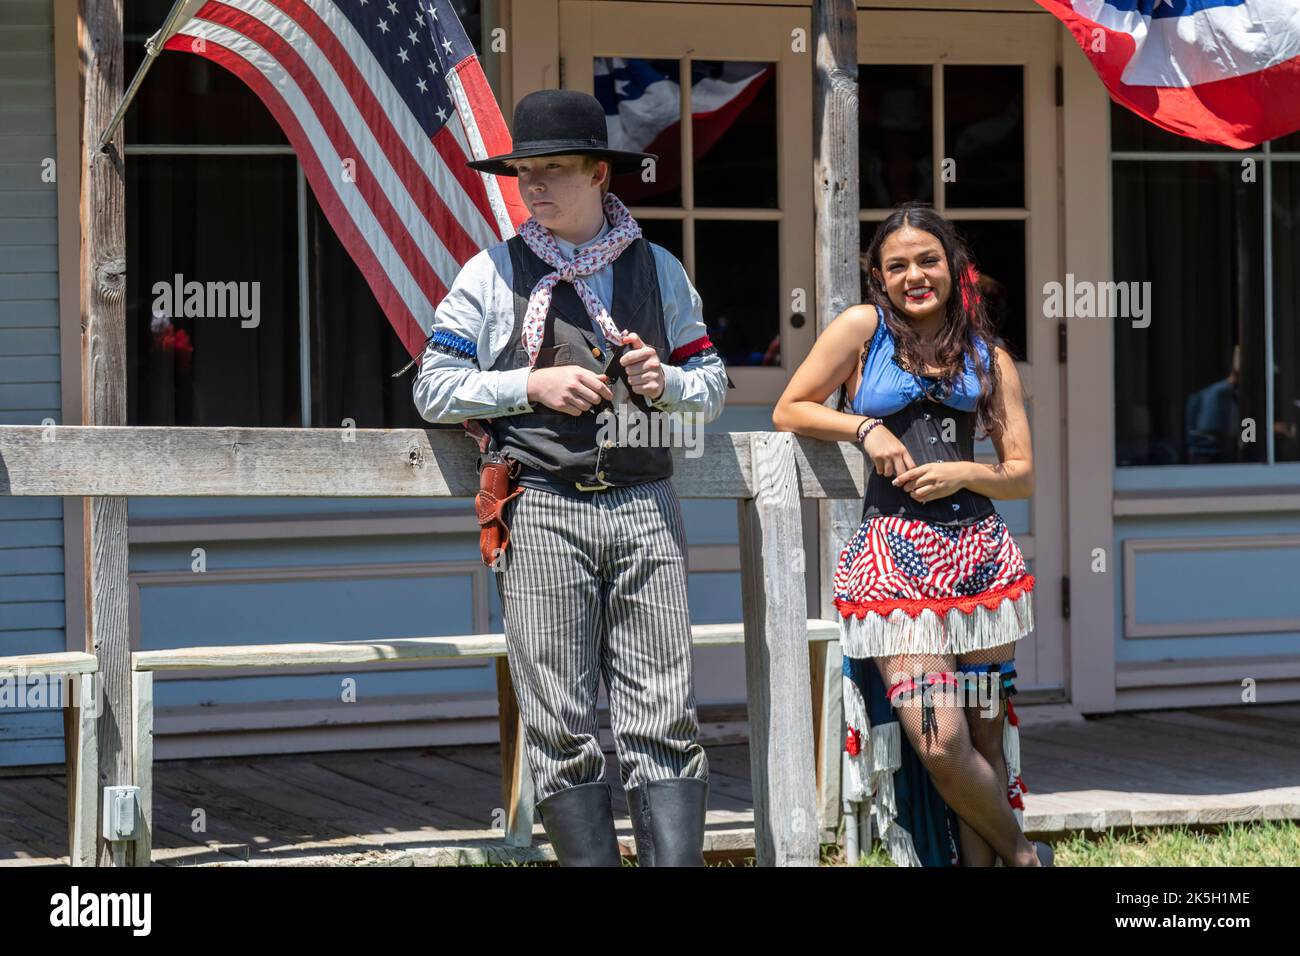 Dodge City, Kansas - Actors at the Boot Hill Museum. The museum preserves the history and culture of the old west. Located on the site of the city's o Stock Photo